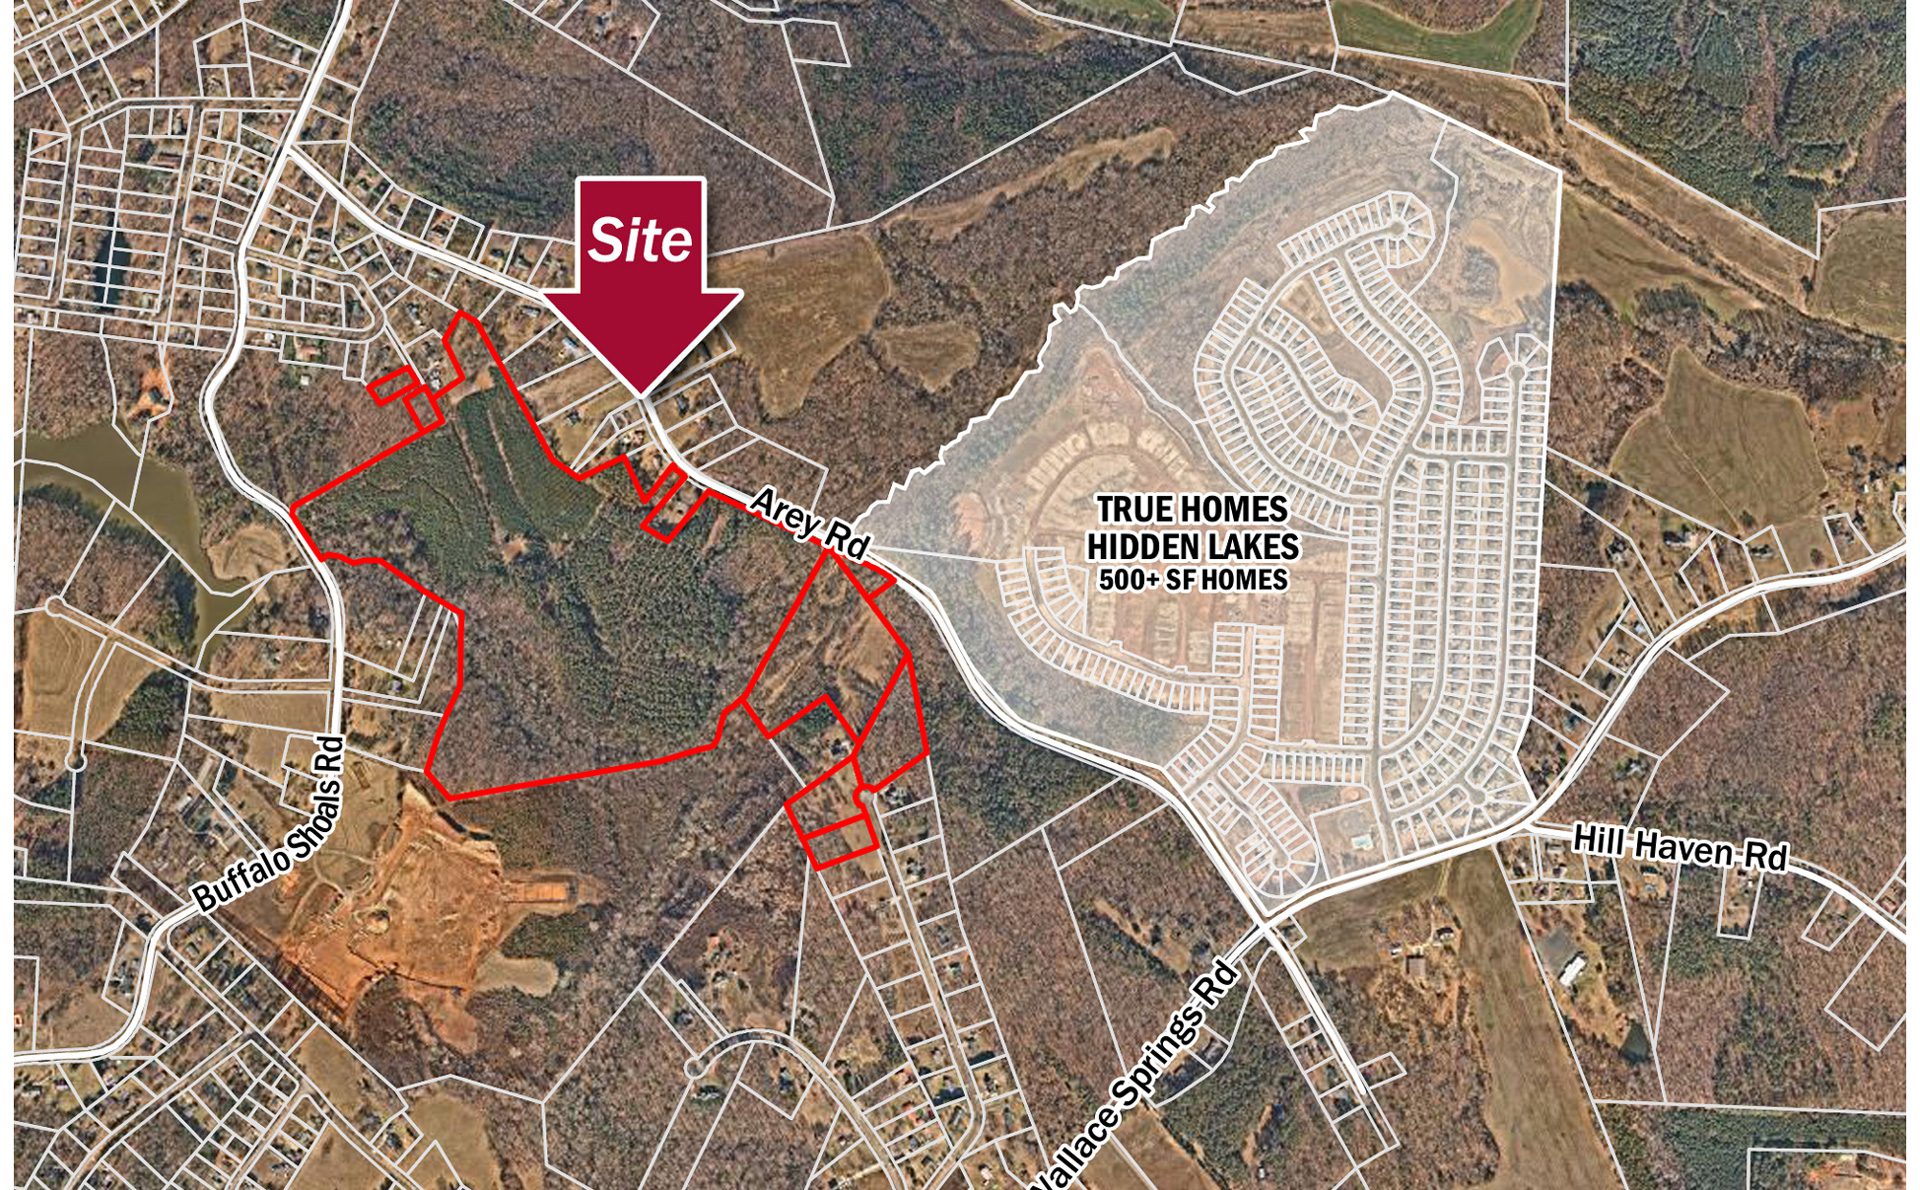 Buffalo Shoals Road Statesville land site parcels